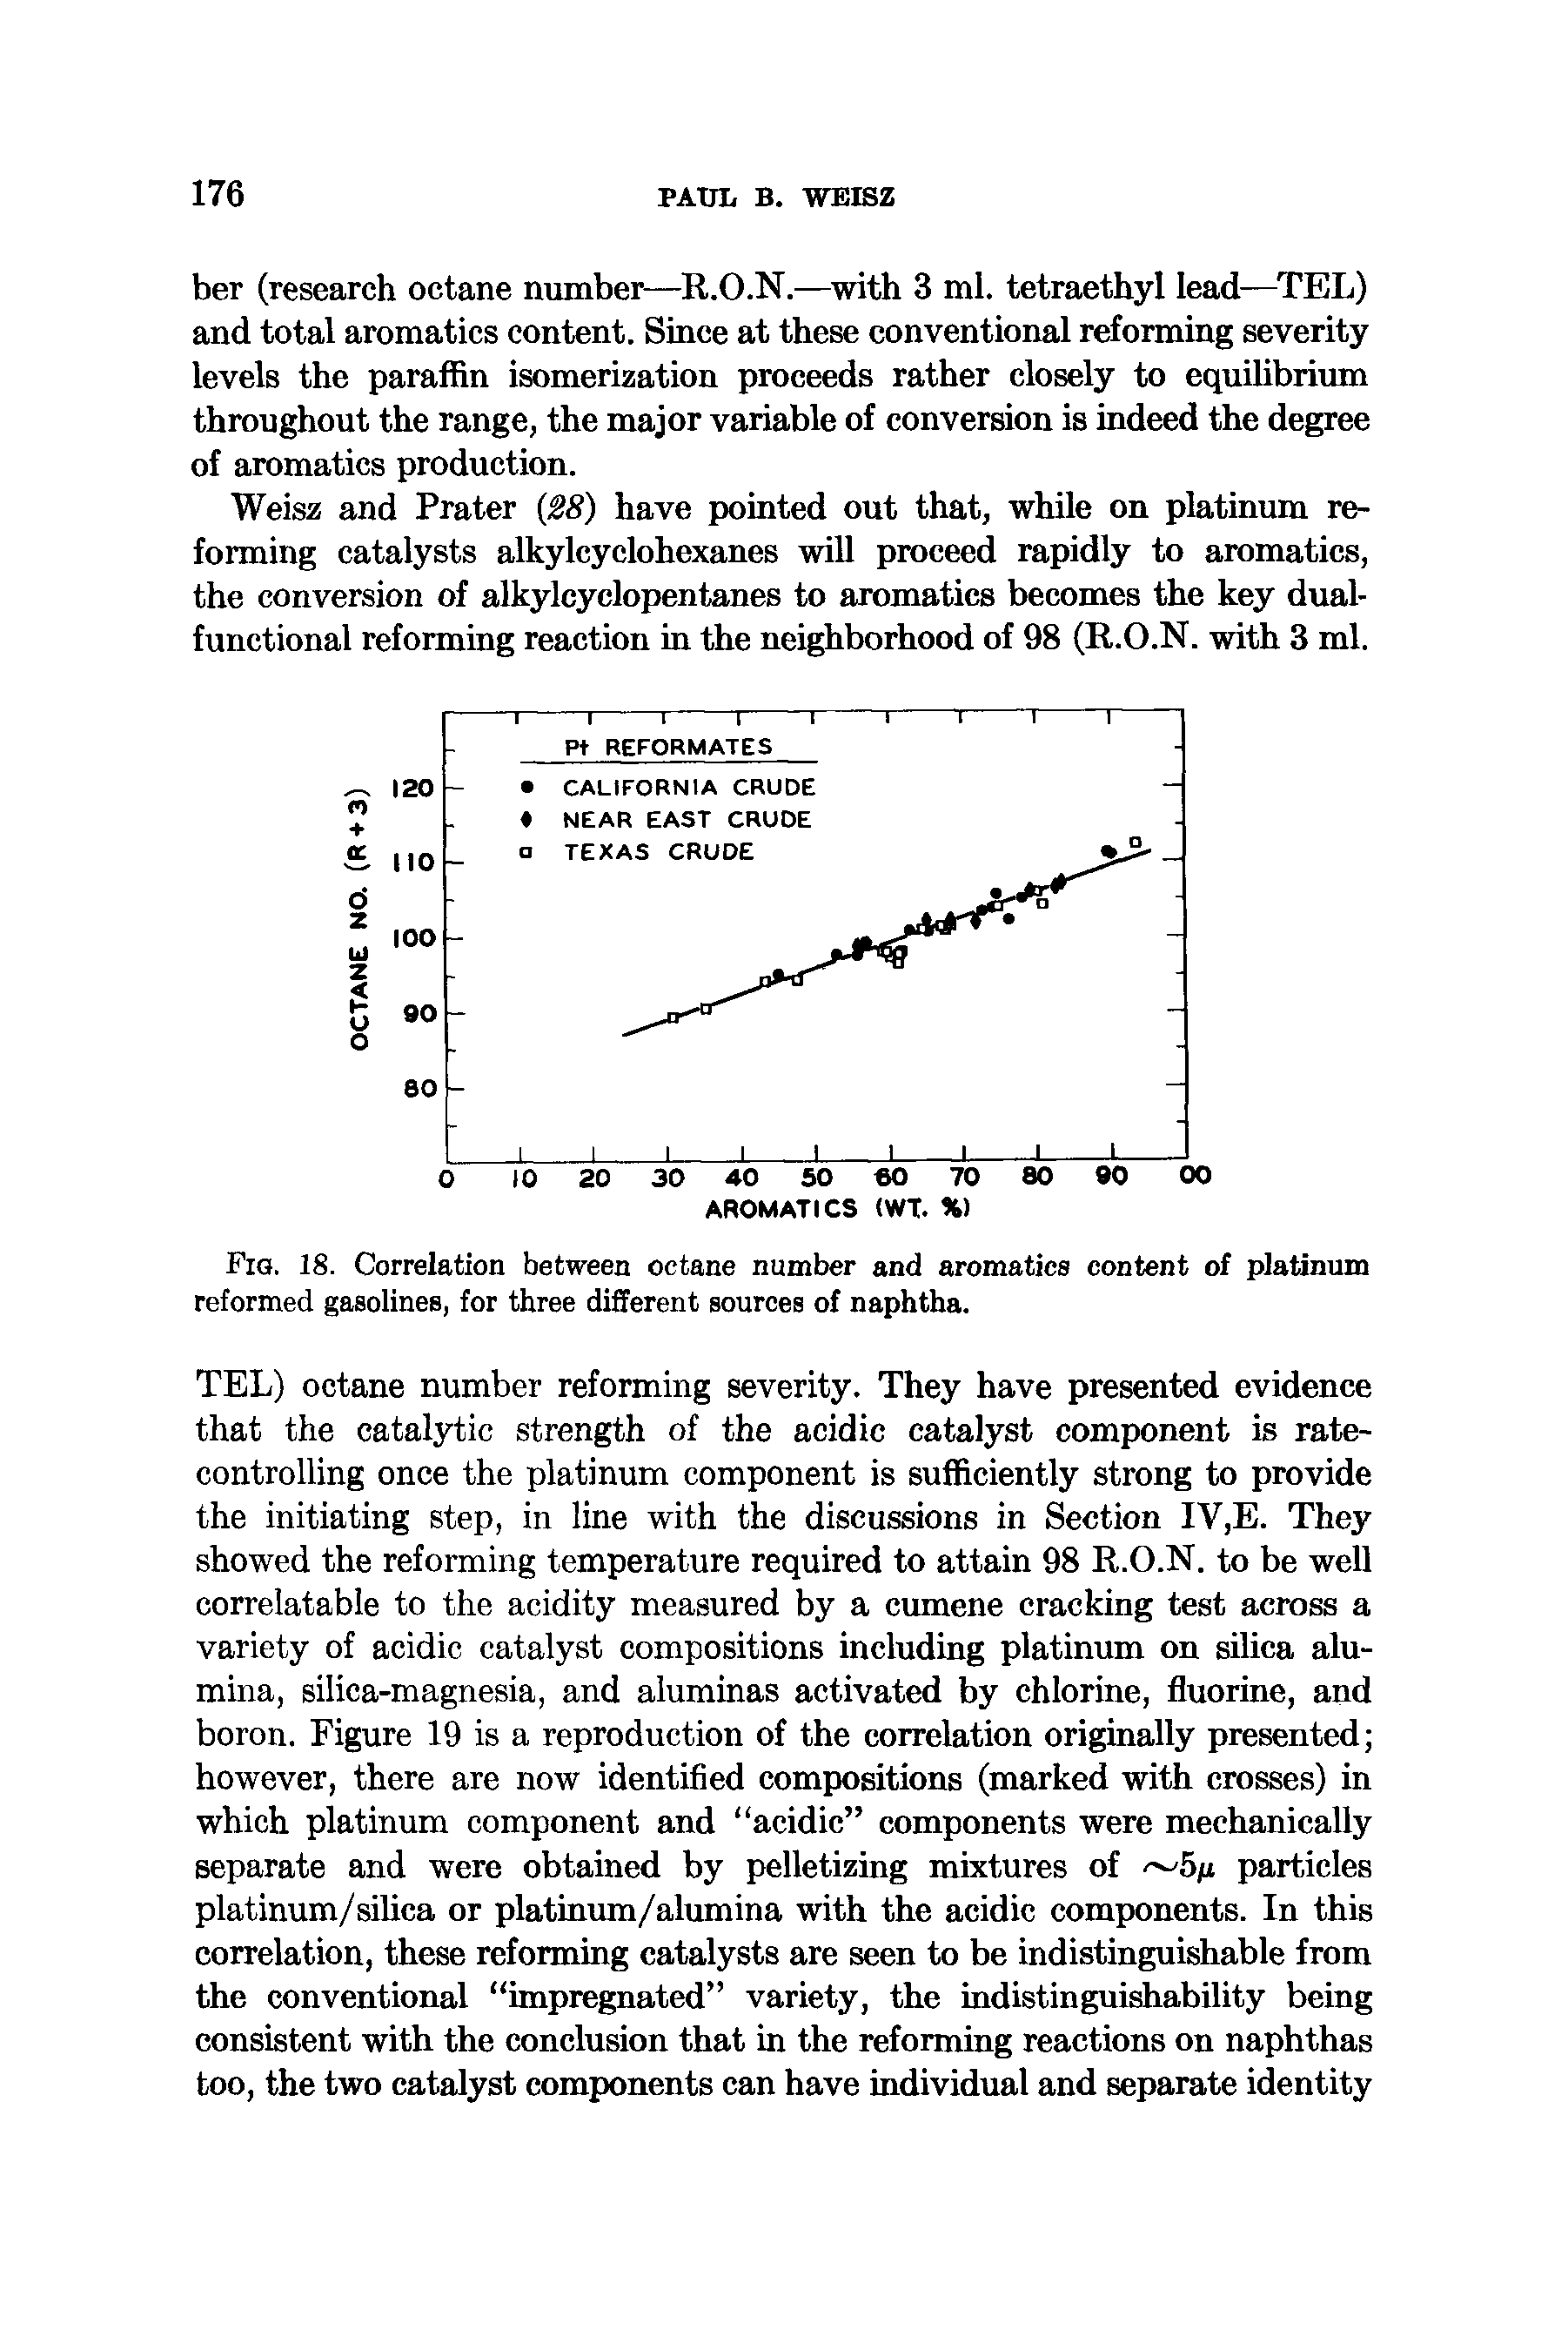 Fig. 18. Correlation between octane number and aromatics content of platinum reformed gasolines, for three different sources of naphtha.